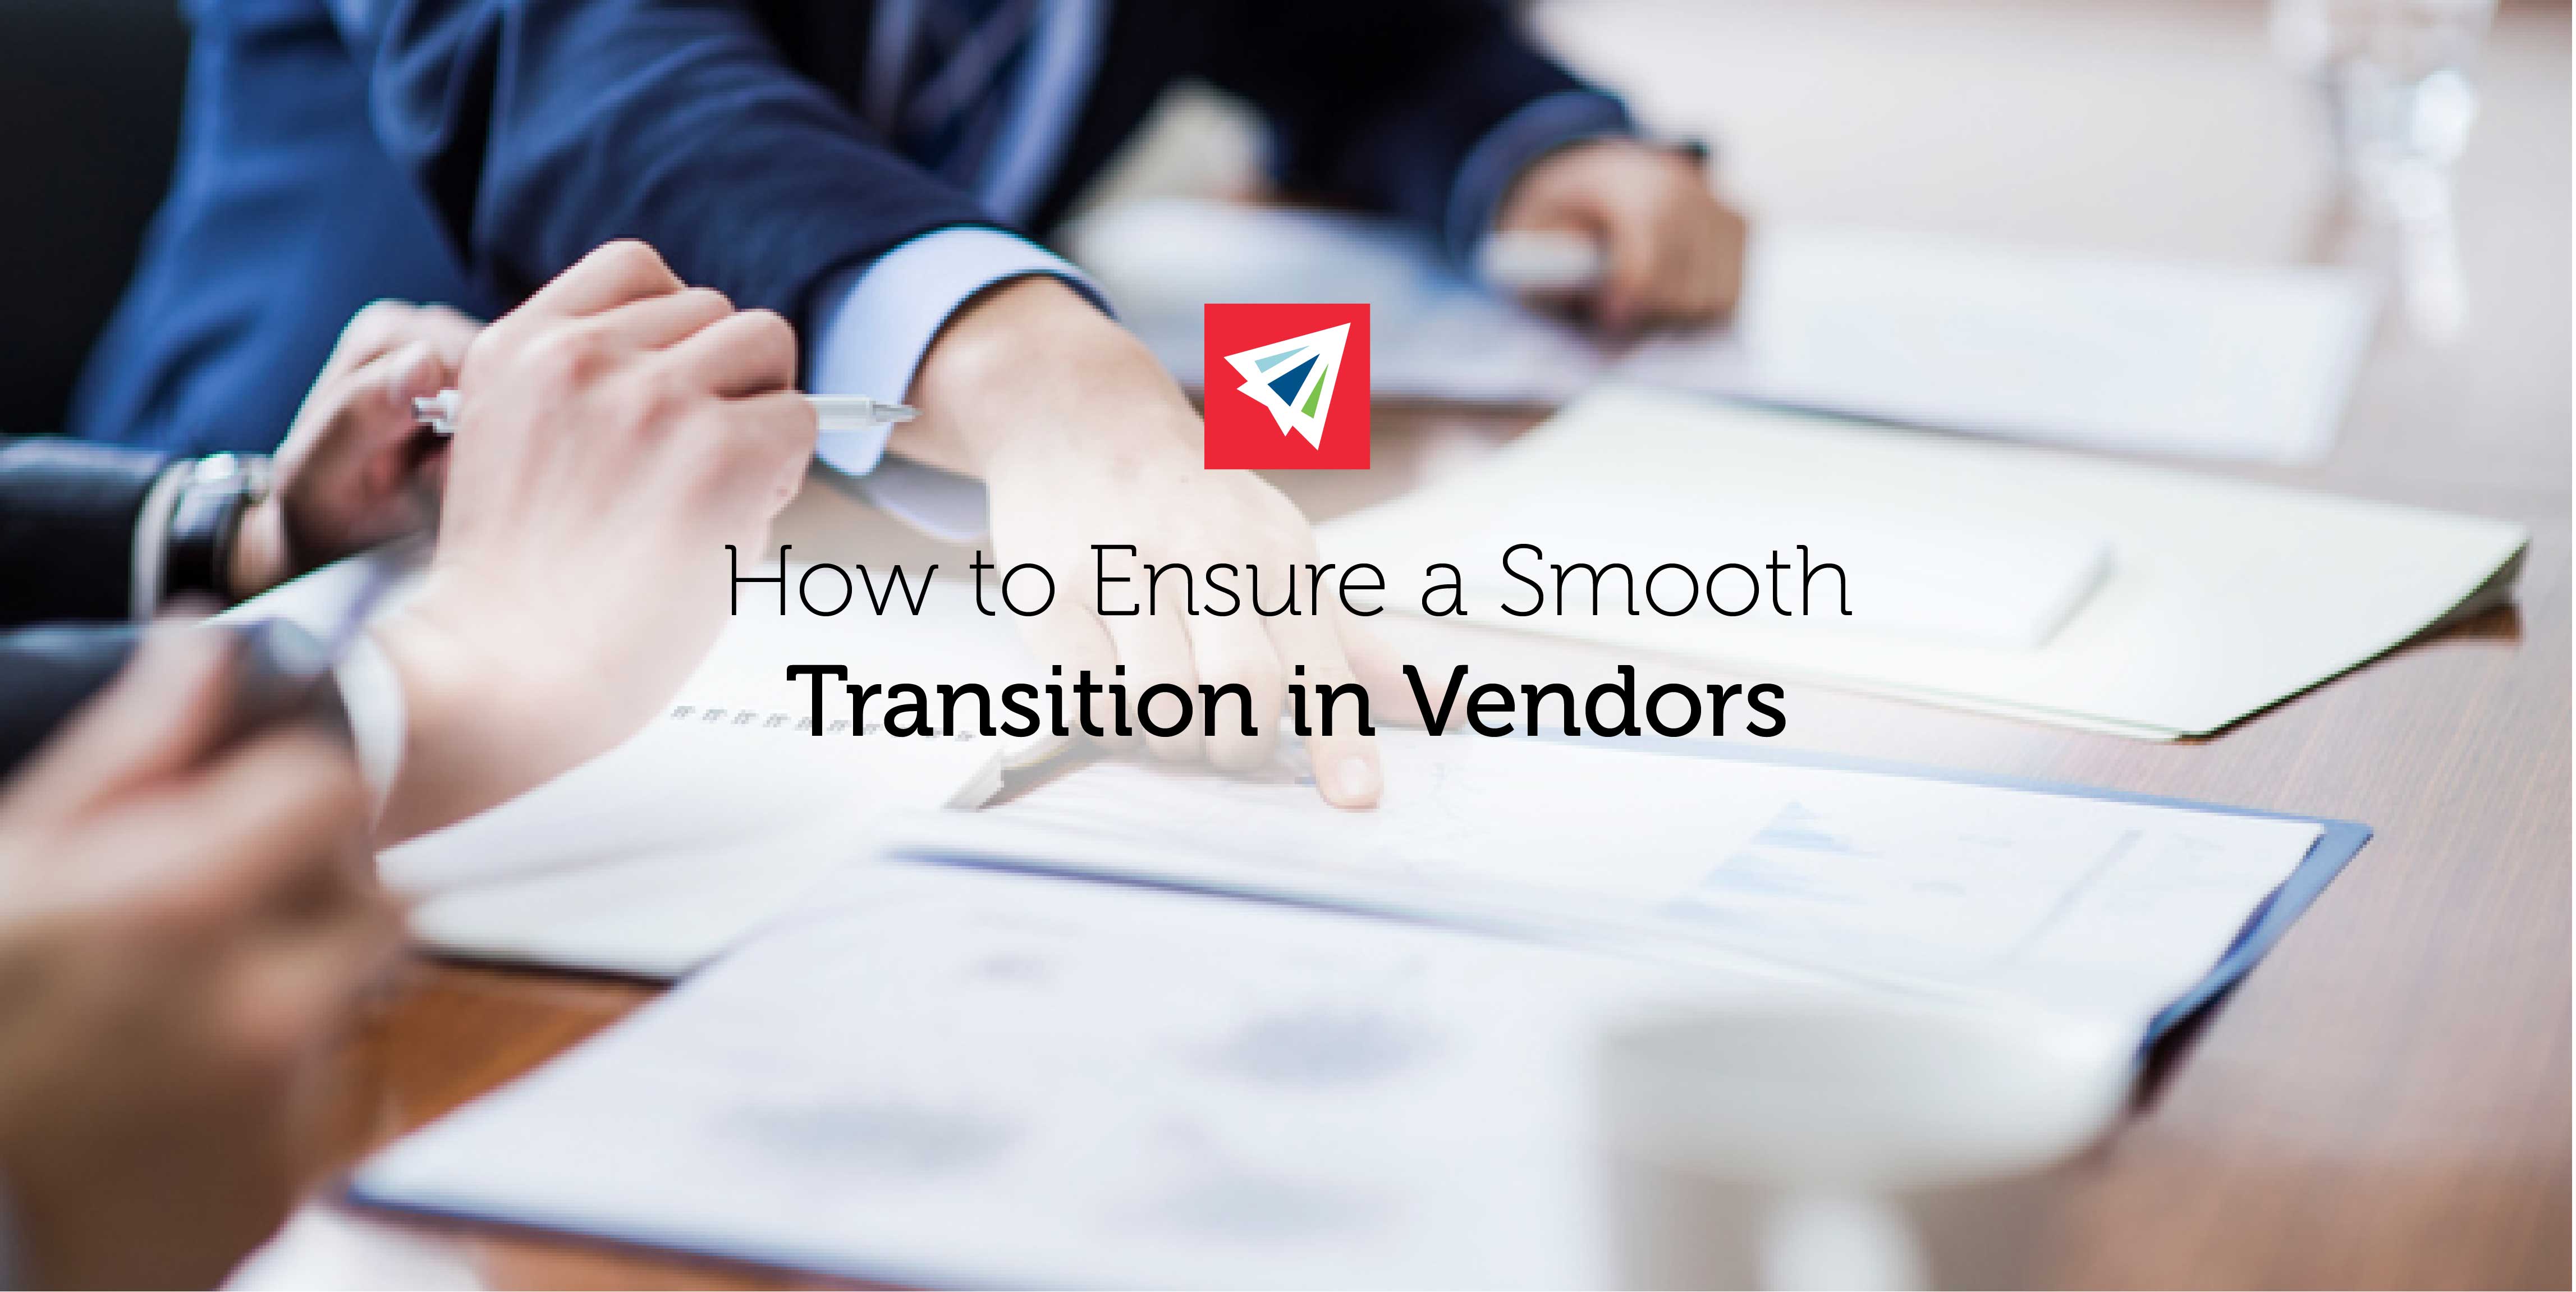 How to Change Vendors Smoothly